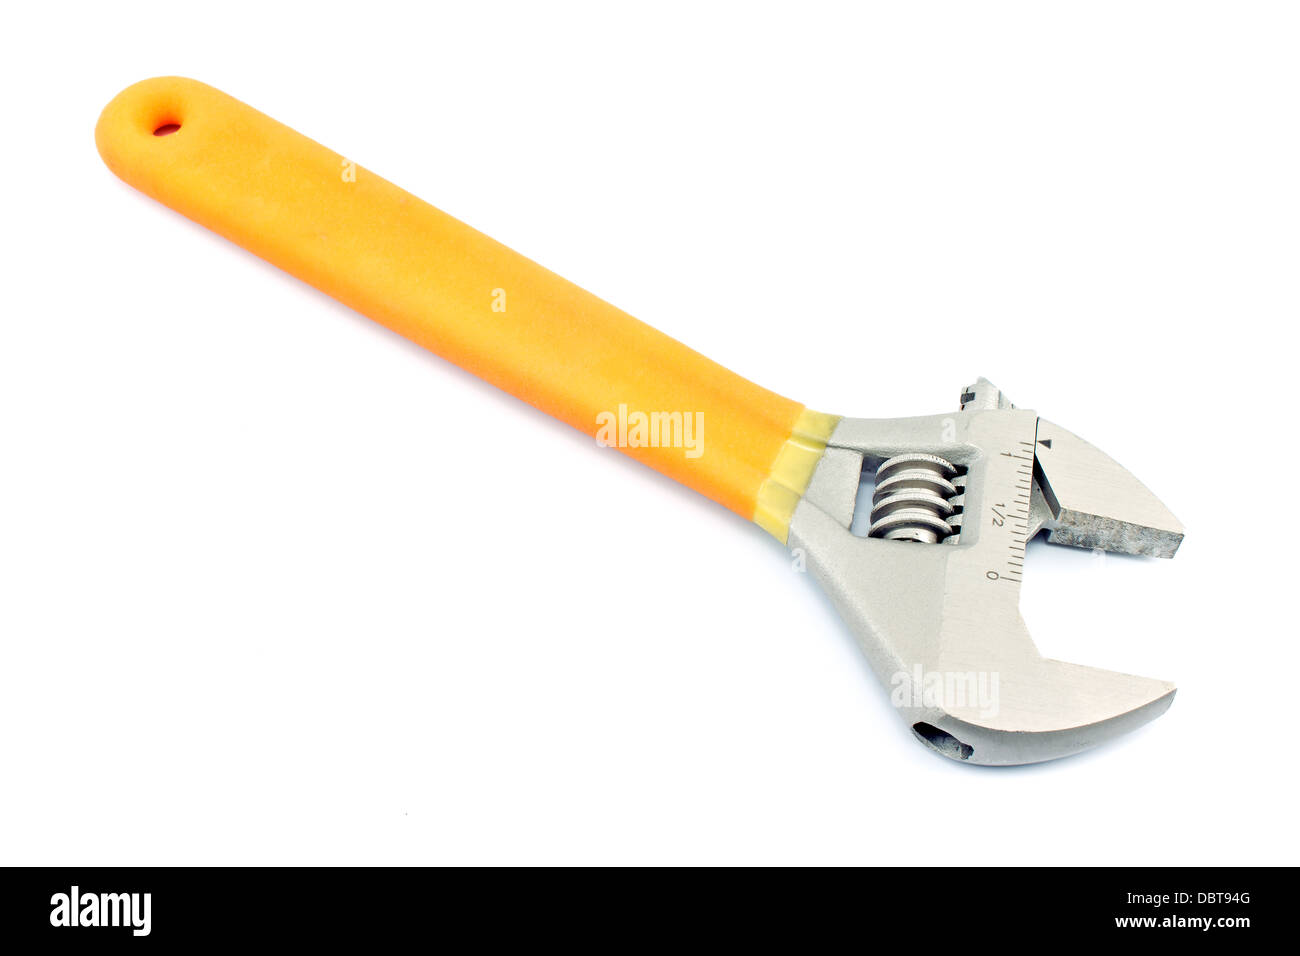 Adjustable wrench tool isolated on white Stock Photo